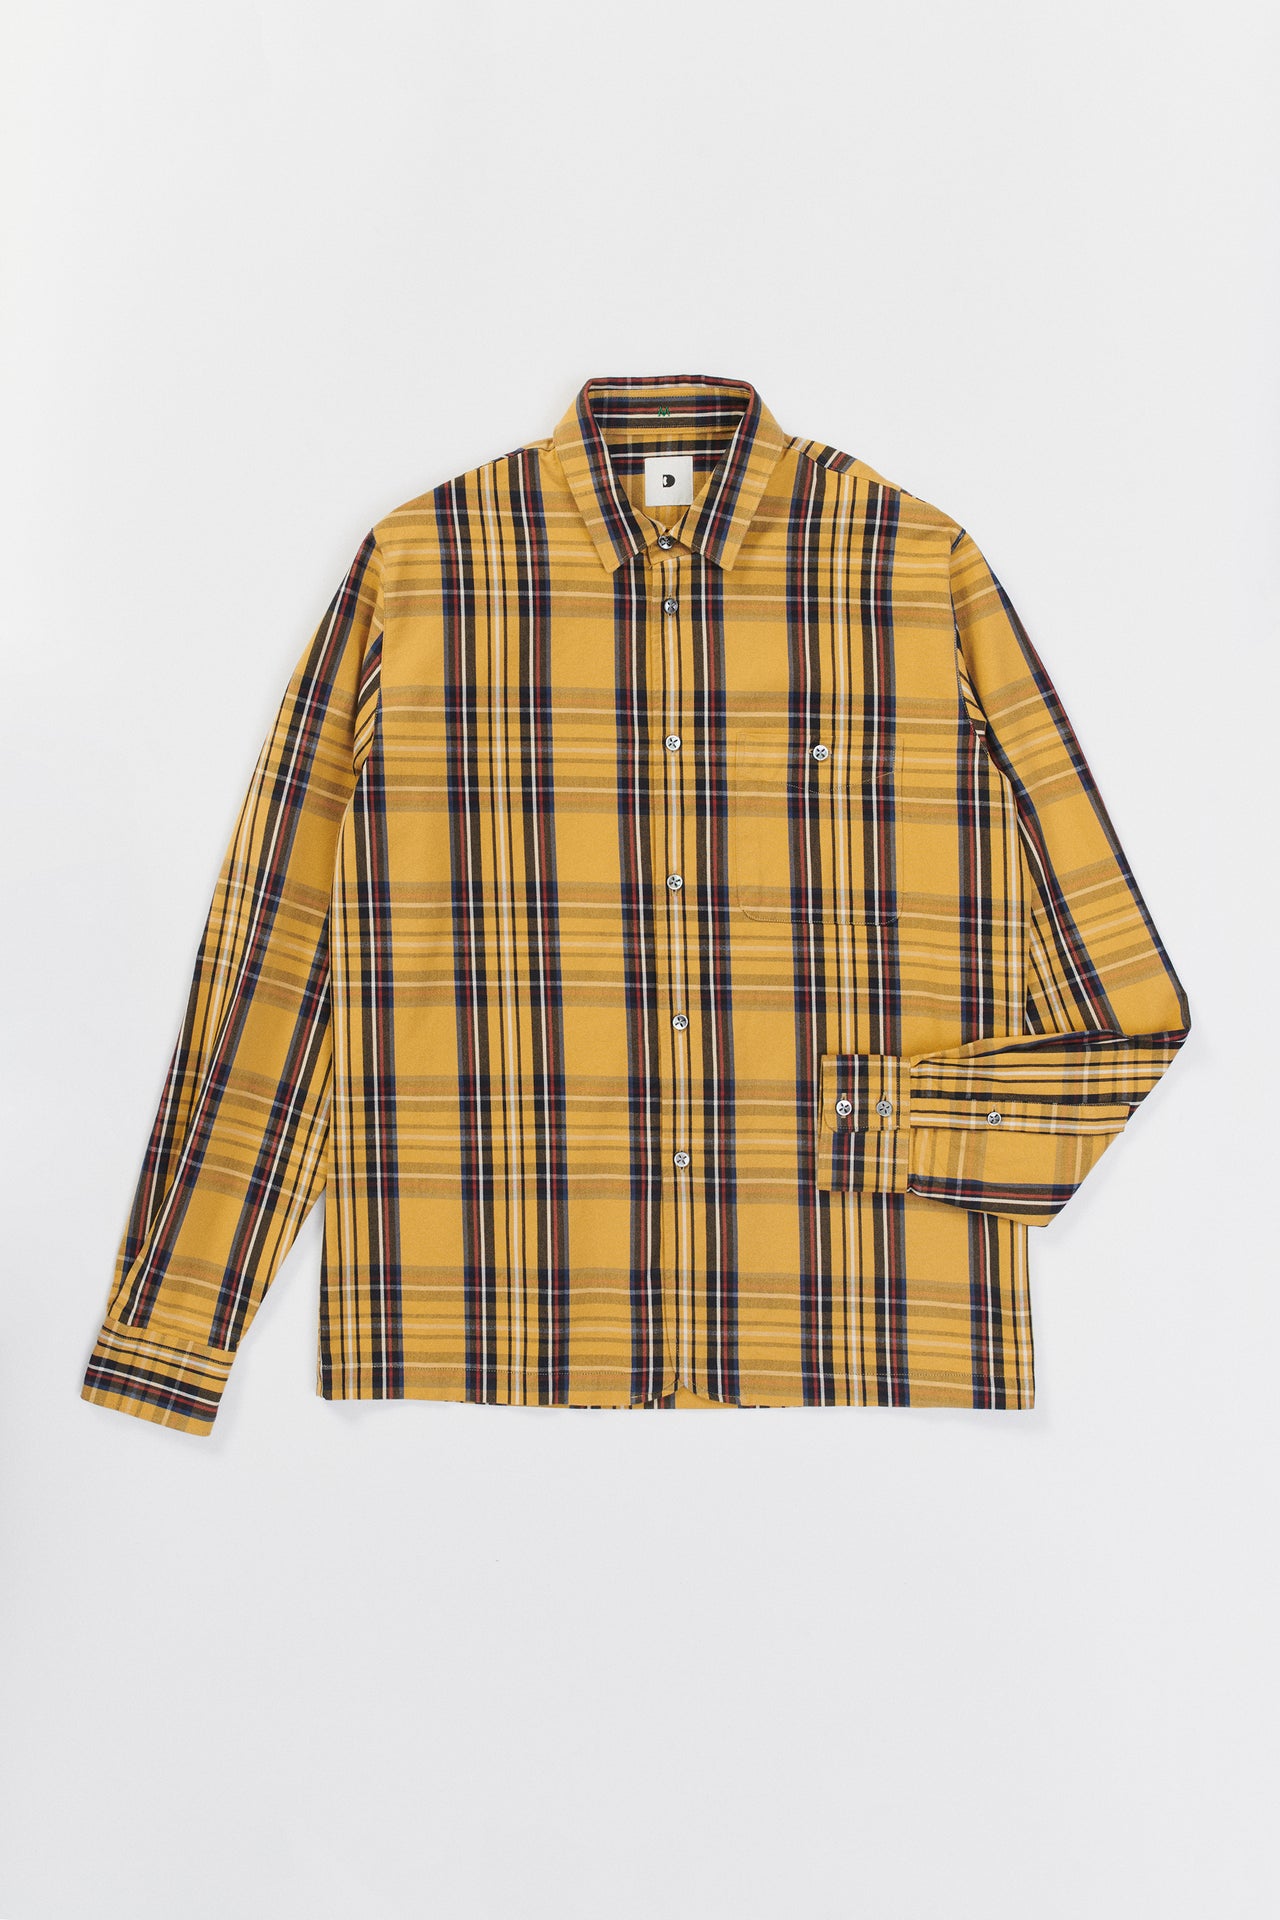 Strong Shirt in a Yellow, Red and Dark Blue Italian Sturdy Italian Cotton